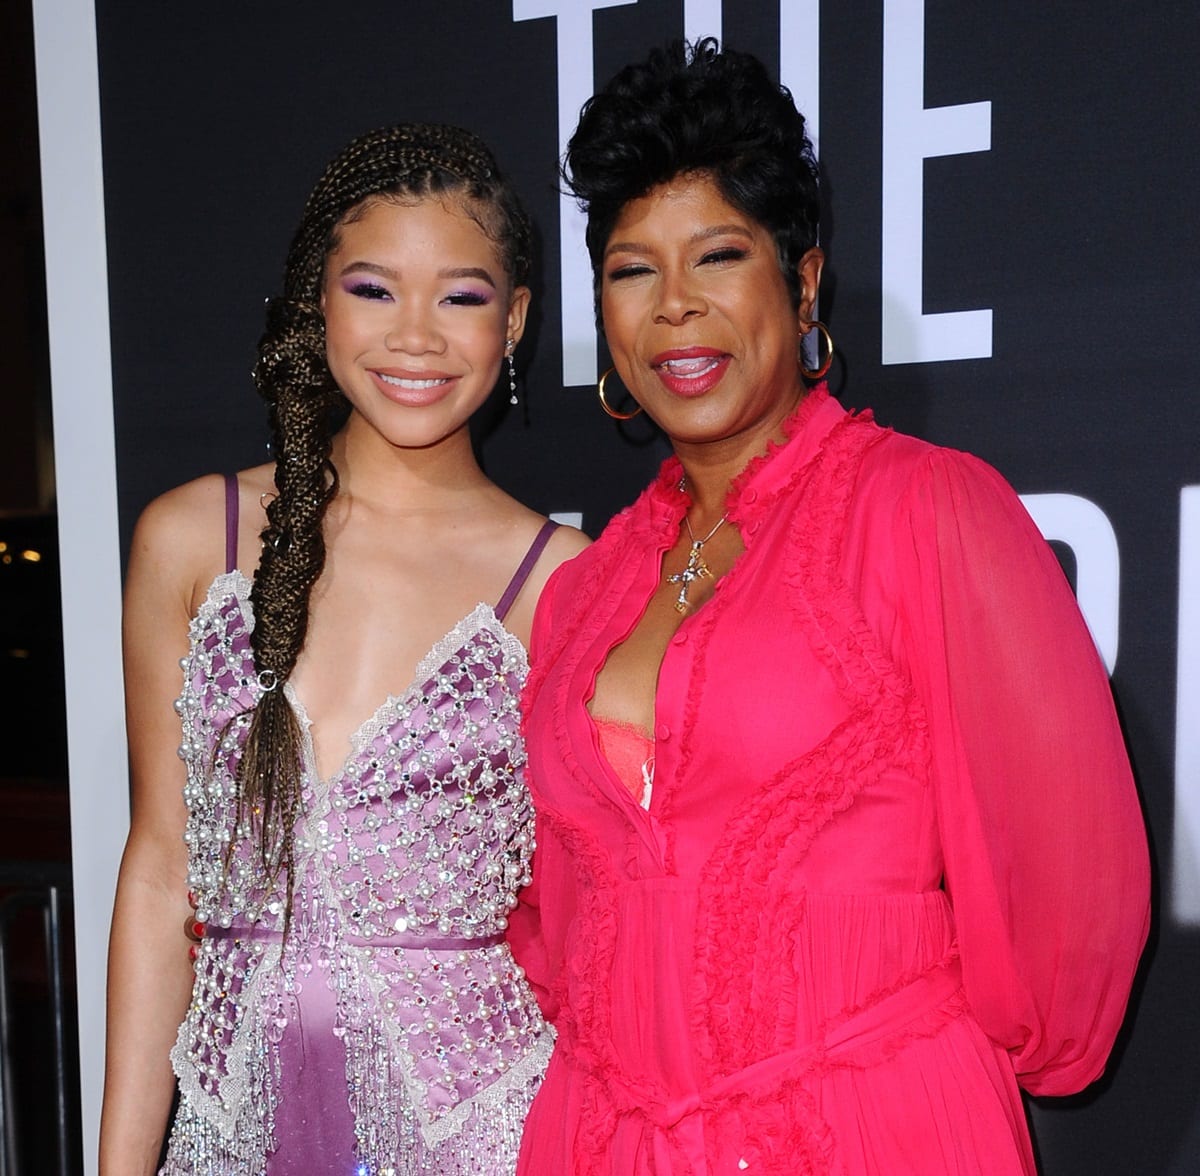 Storm Reid said that her mom, Robyn Simpson Reid, has always been supportive and has encouraged her to do what makes her happy, even if that means quitting acting